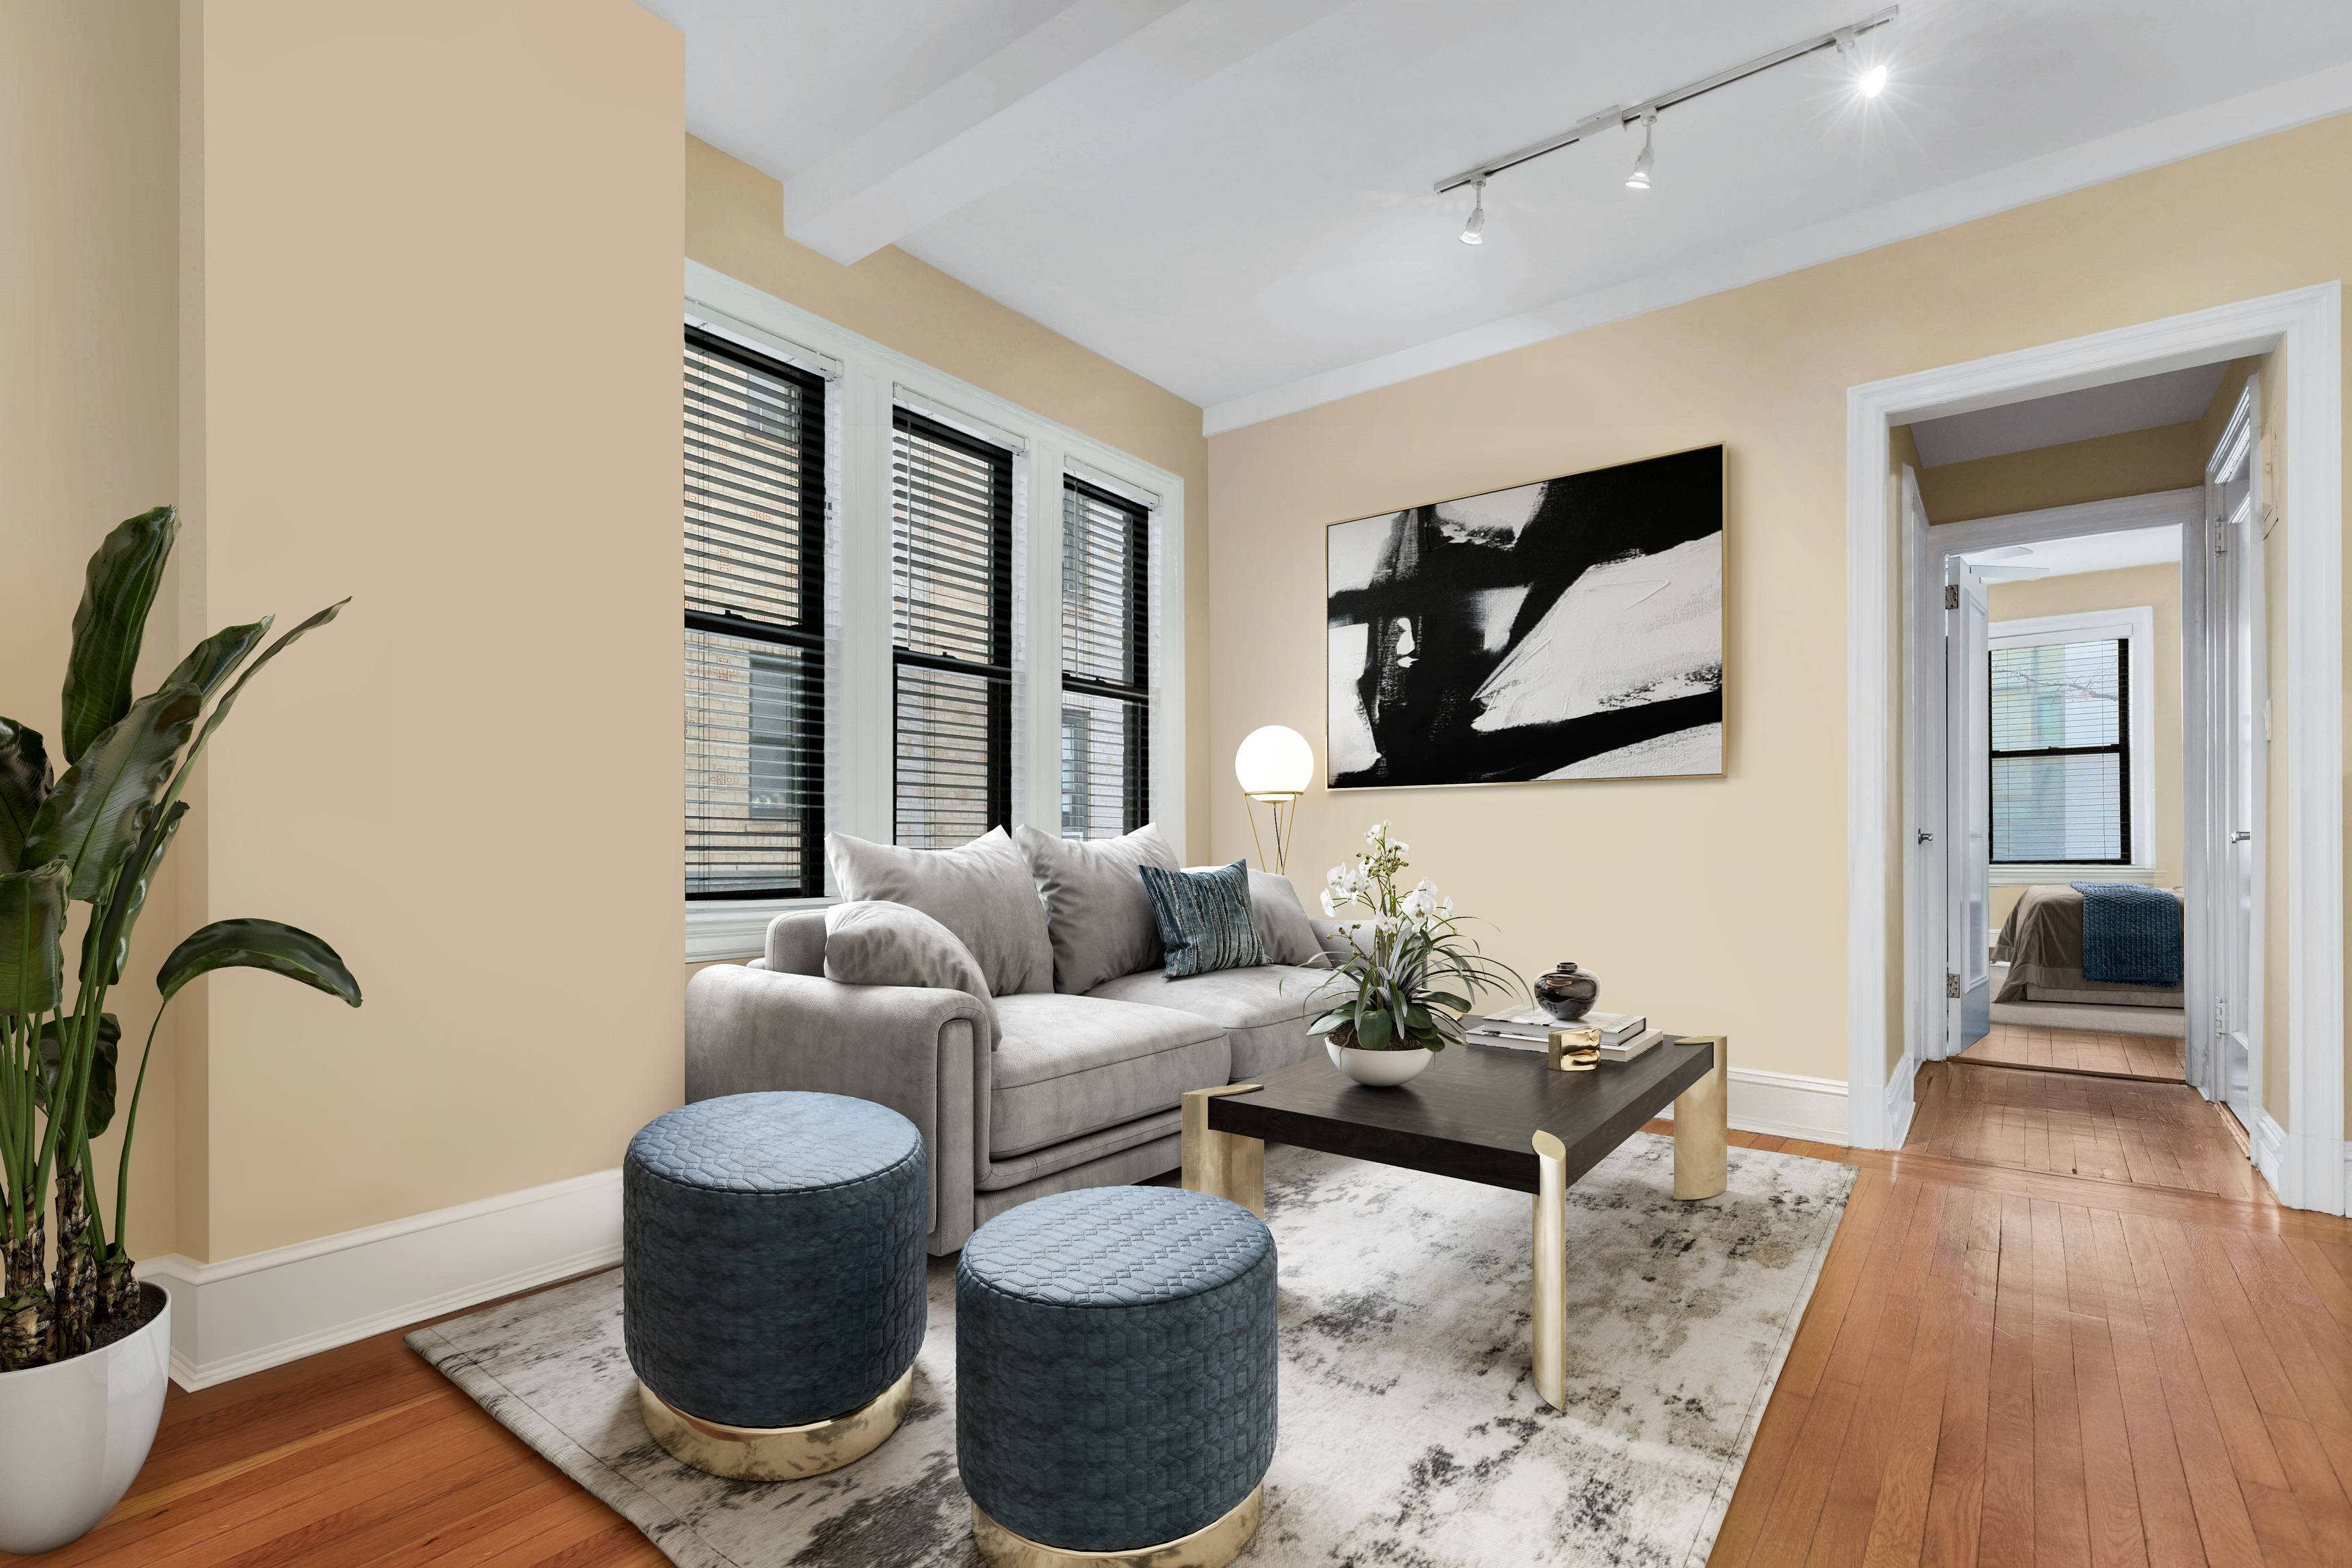 LIFE TENANT: AMAZING LONGTERM INVESTMENT OPPORTUNITY: 157 East 72nd Street $550,000